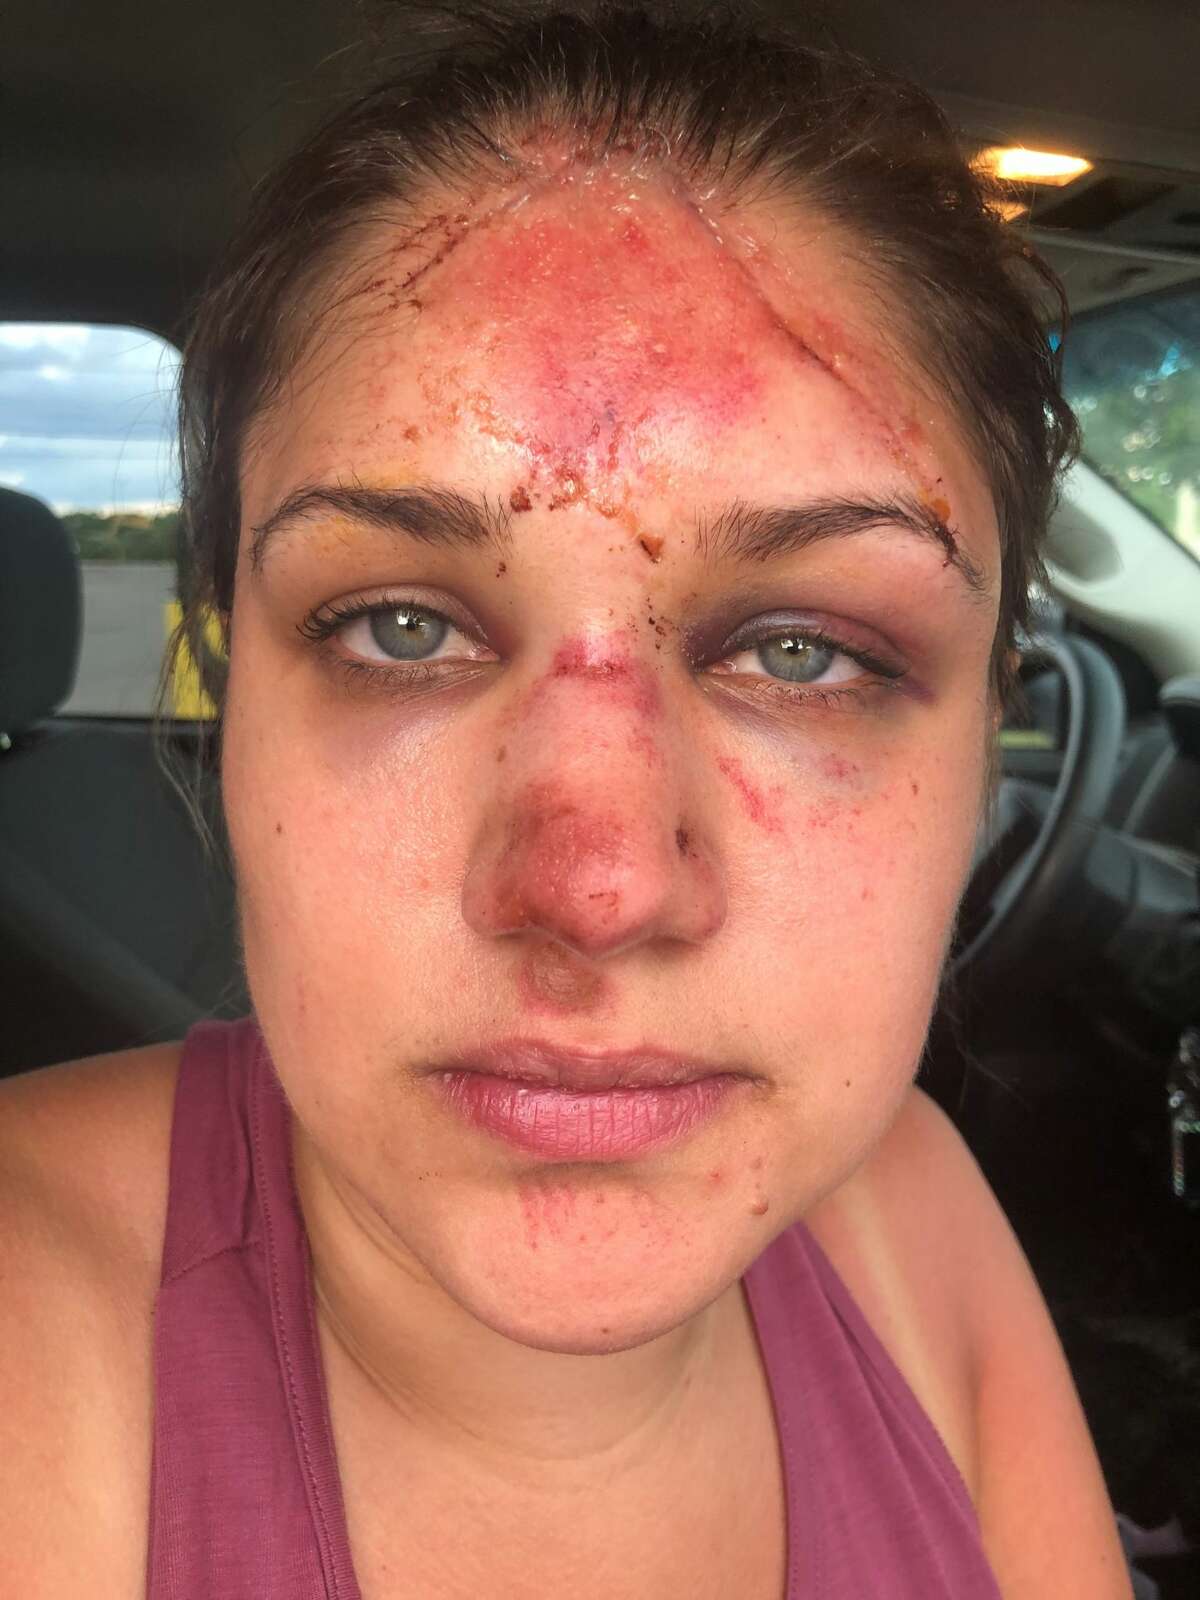 Texas woman says she was attacked over a tube in New Braunfels